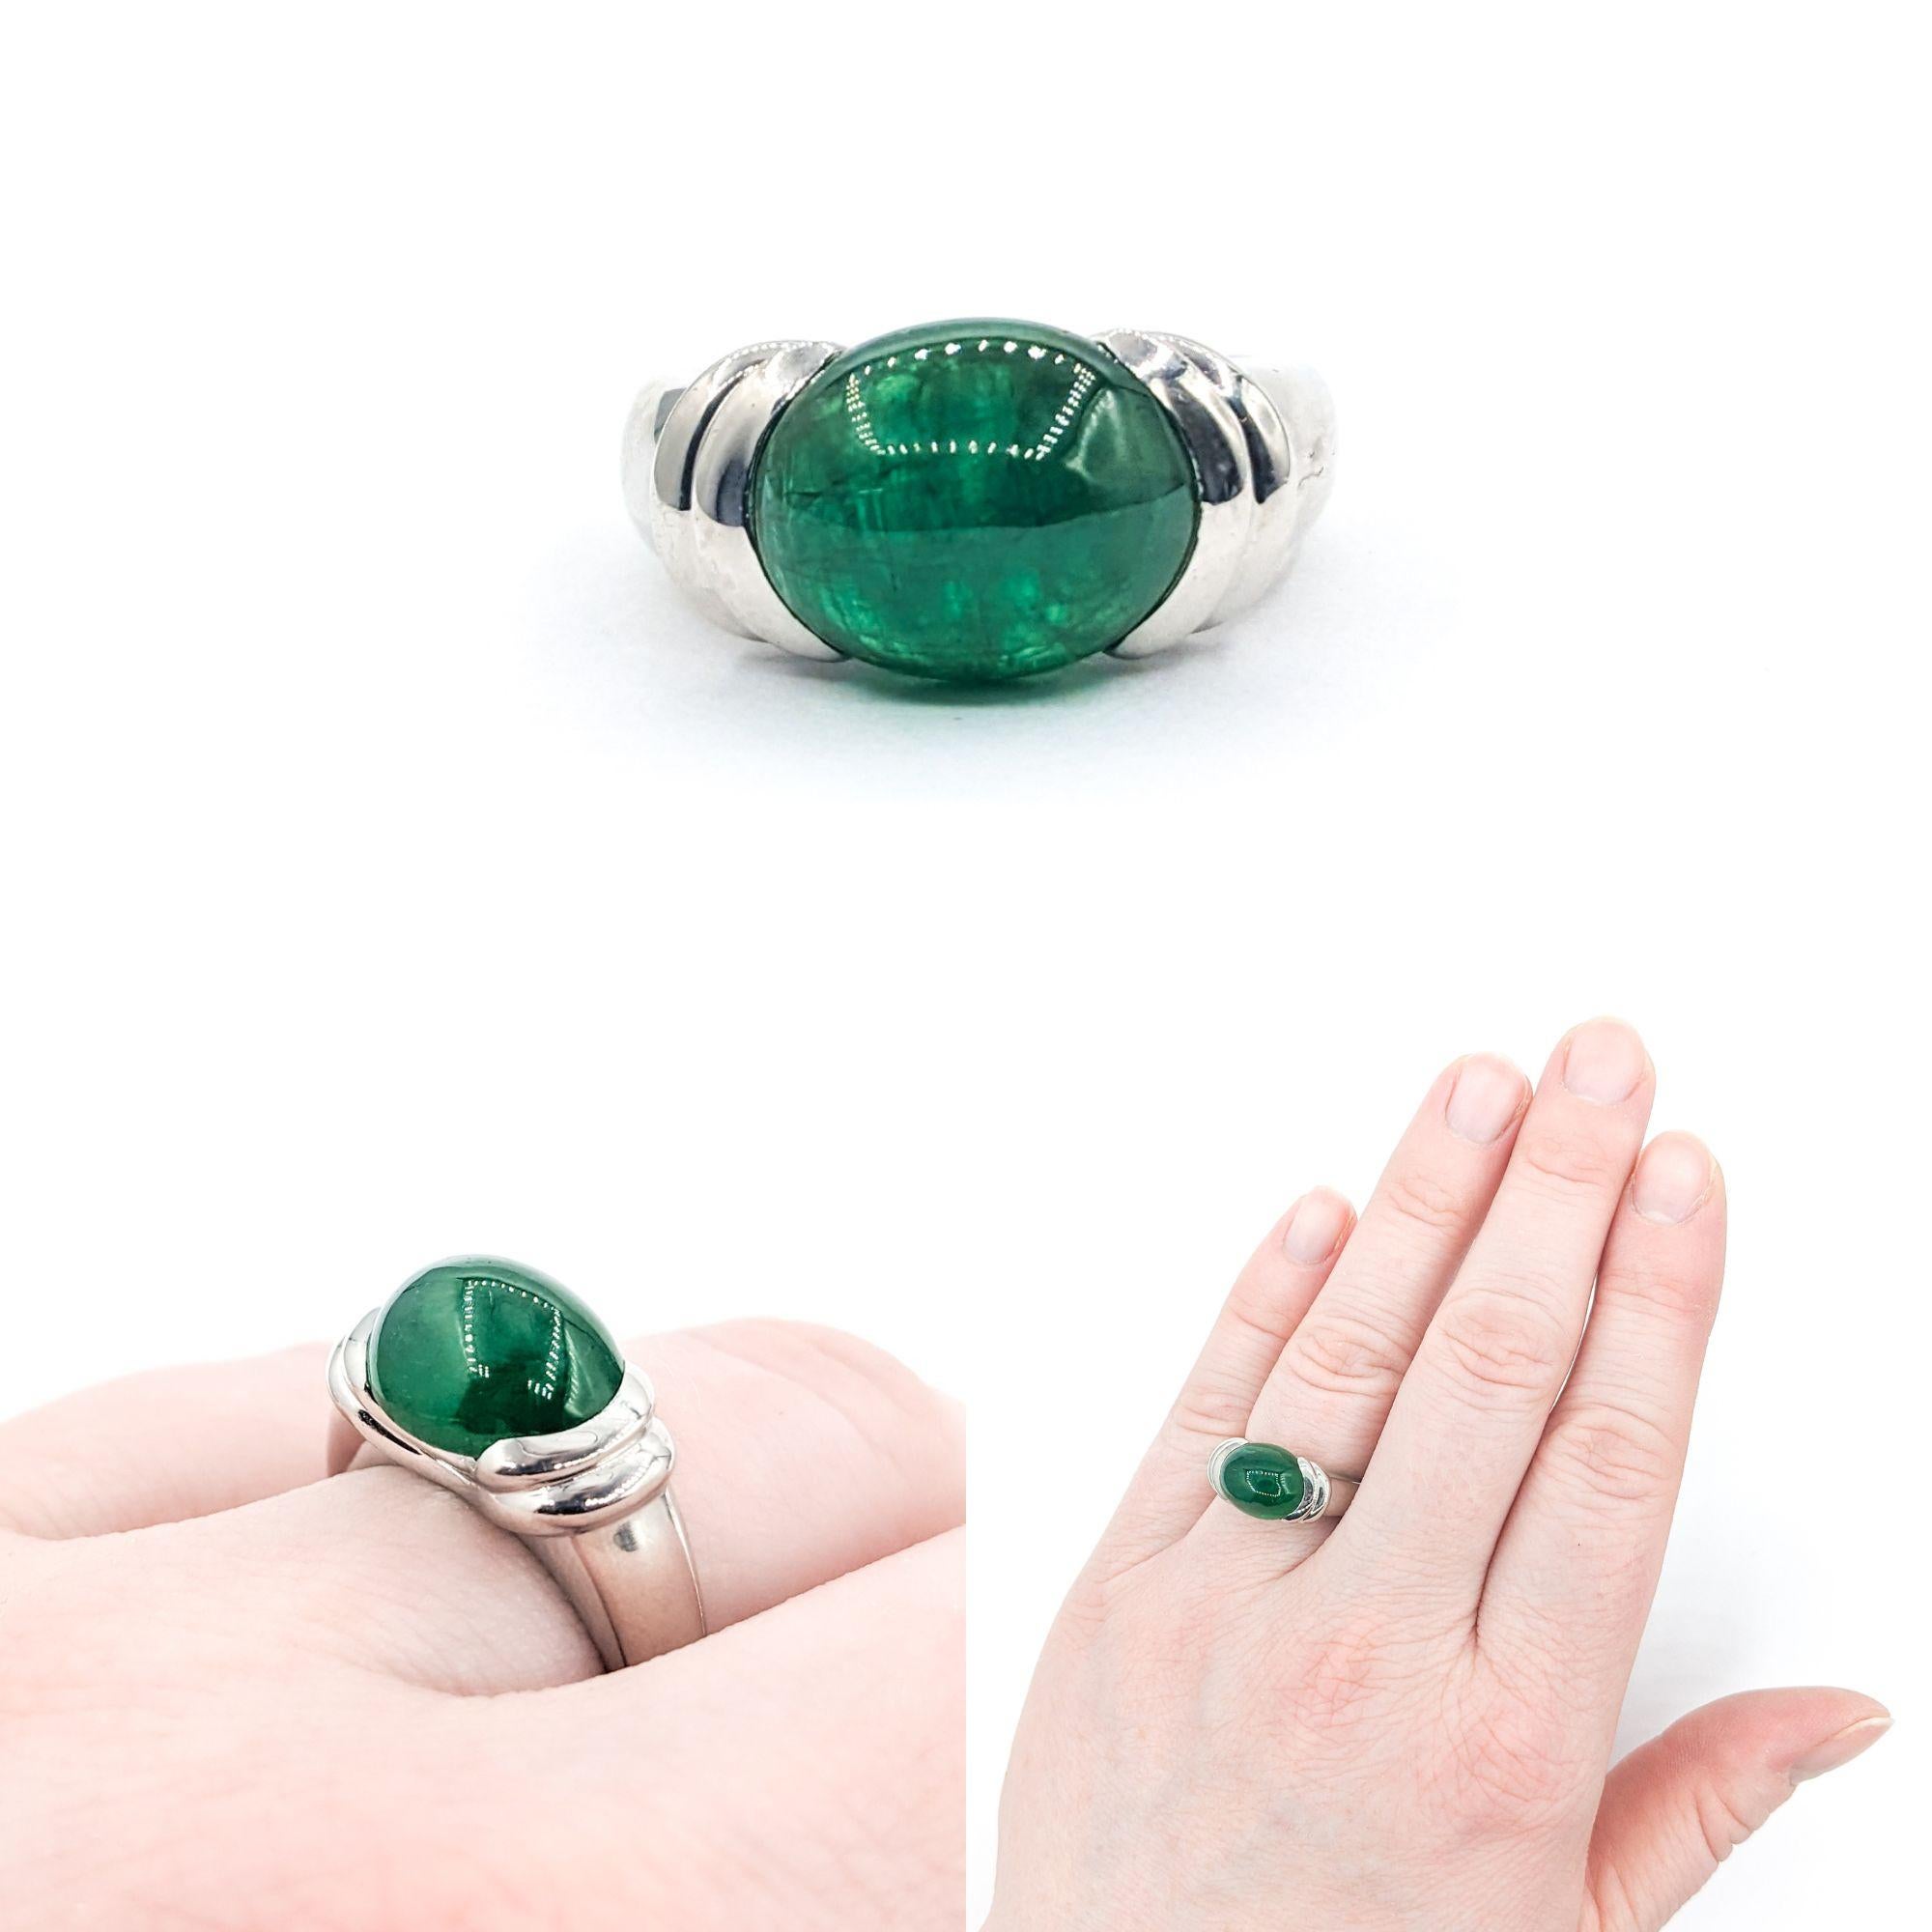 Half Bezel 5.27ct Cabochon Emerald Ring In Platinum

This beautifully crafted Ring in 900 Platinum features a magnificent 5.27ct Cabochon Natural Emerald centerpiece, elegantly set in a sleek Half Bezel setting. The ring's design highlights the